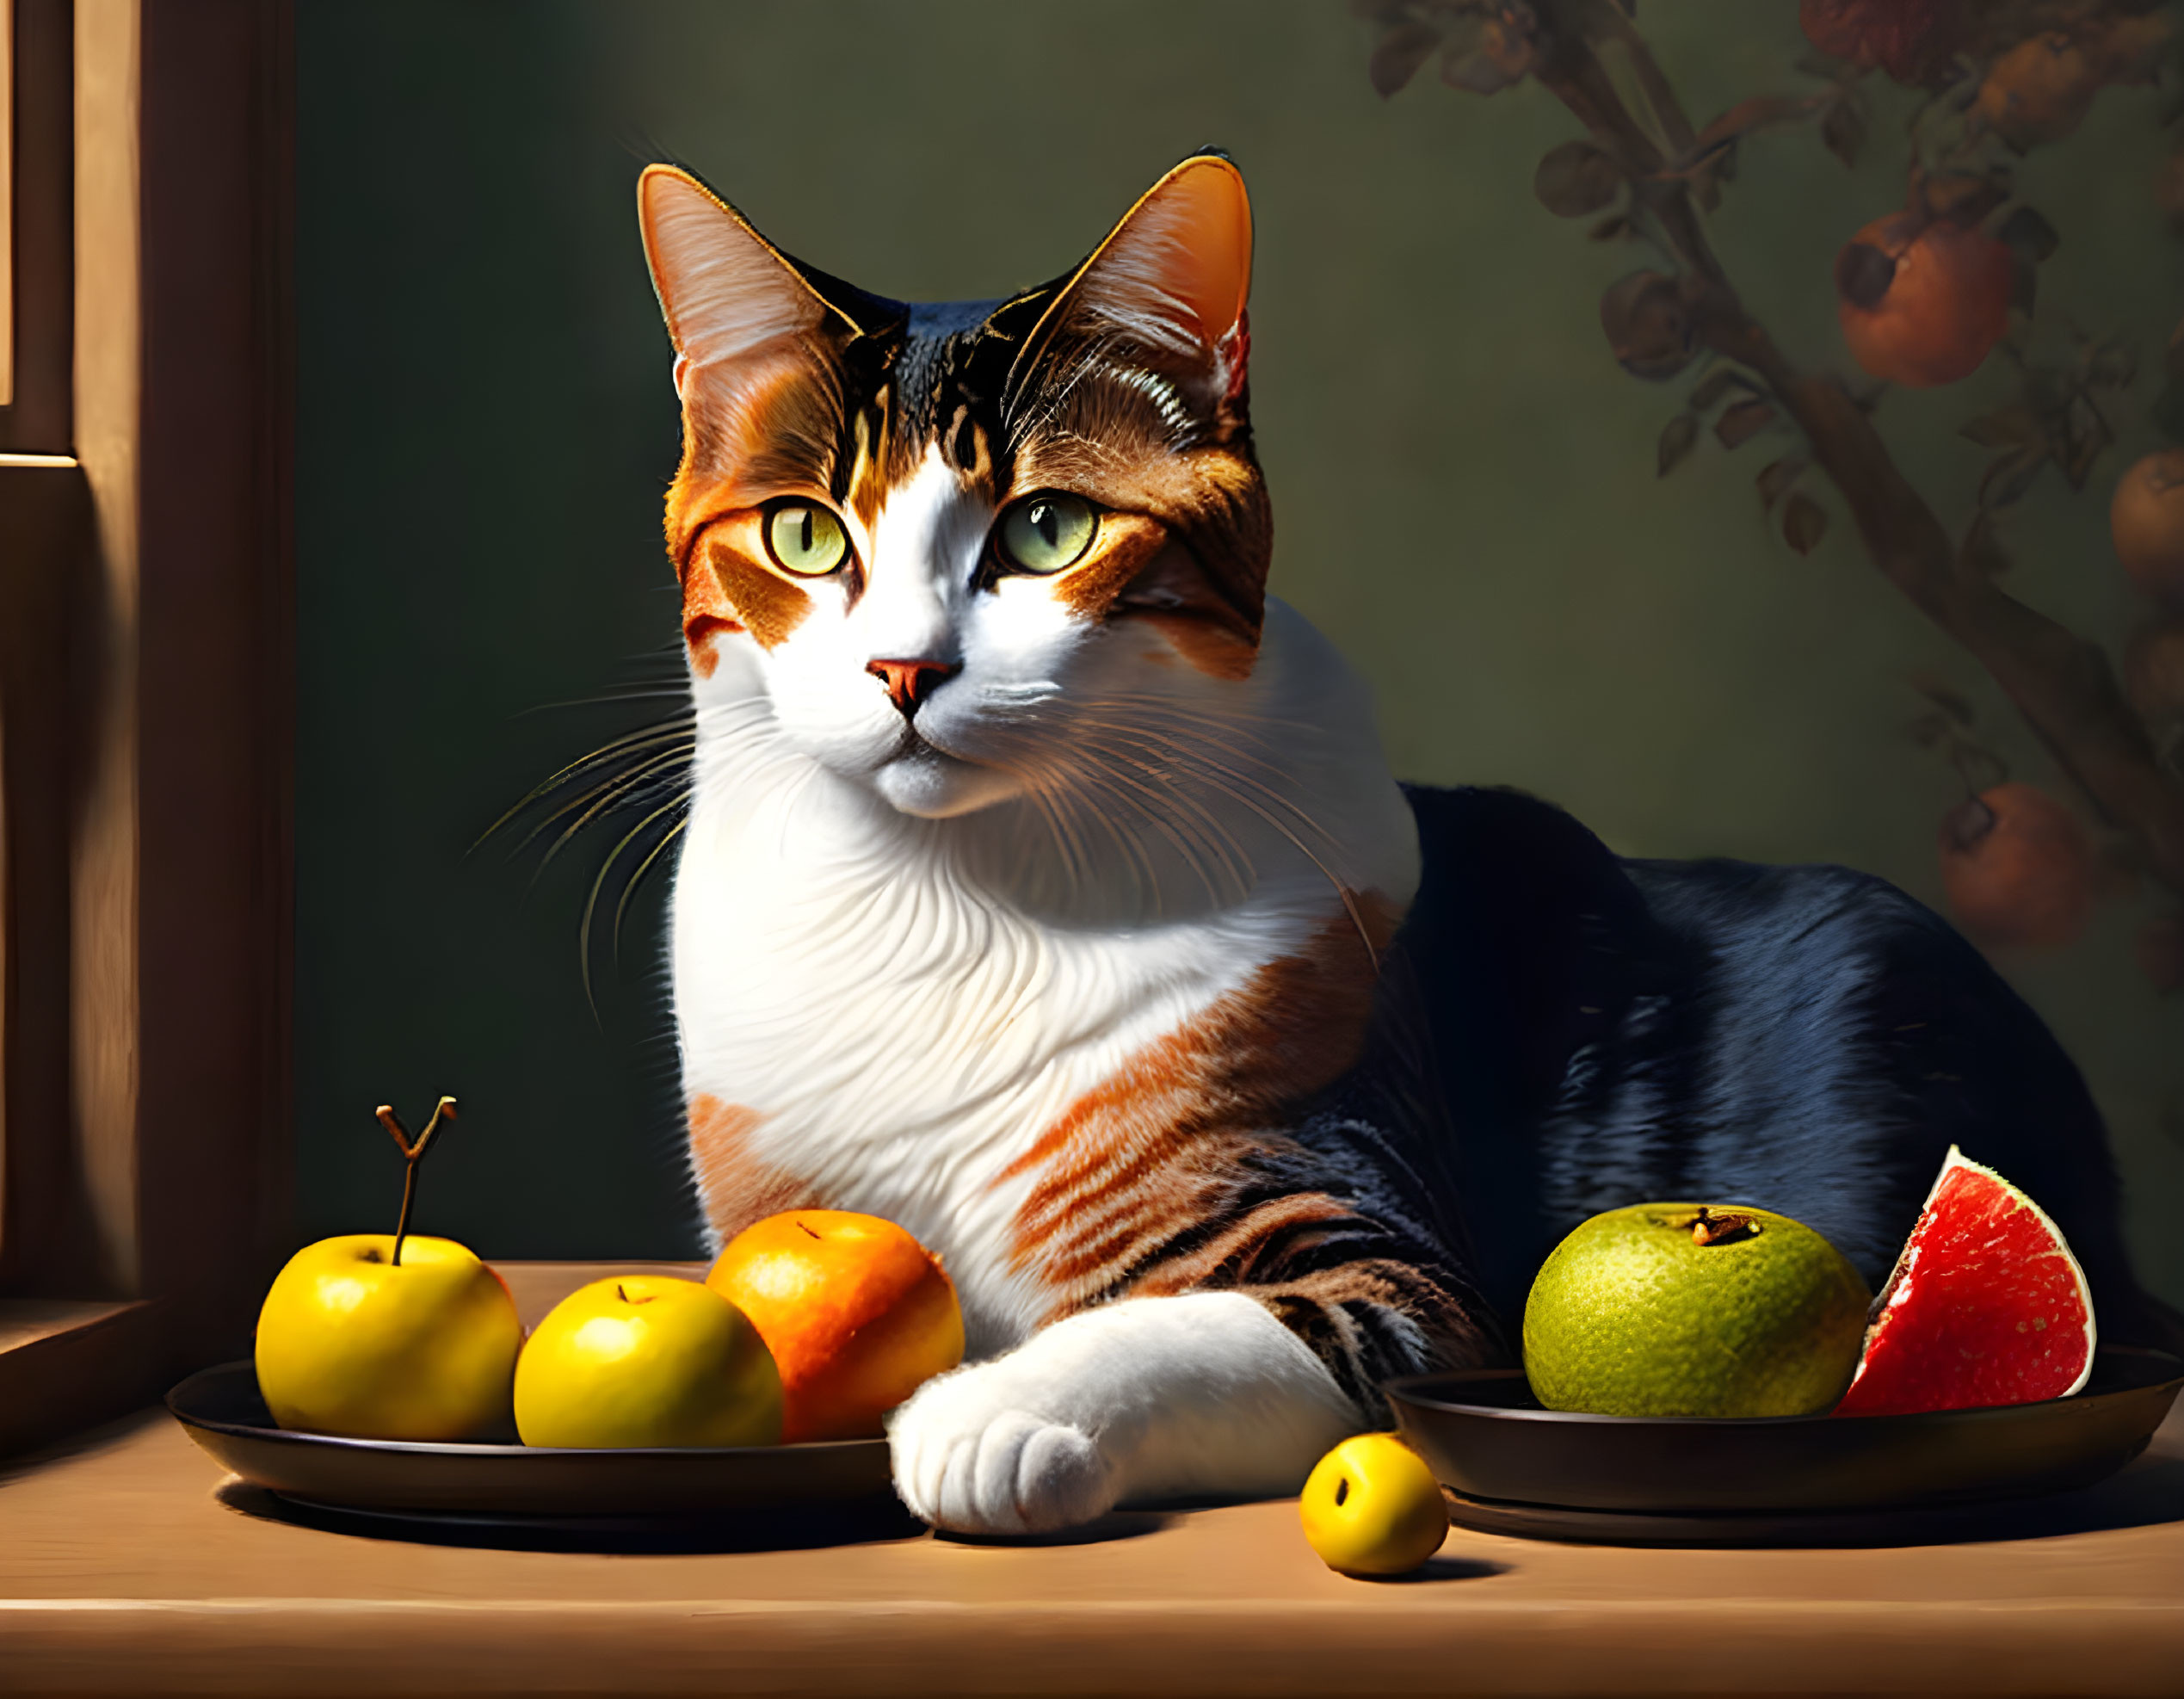 Calico cat with plate of fruit in warm sunlight